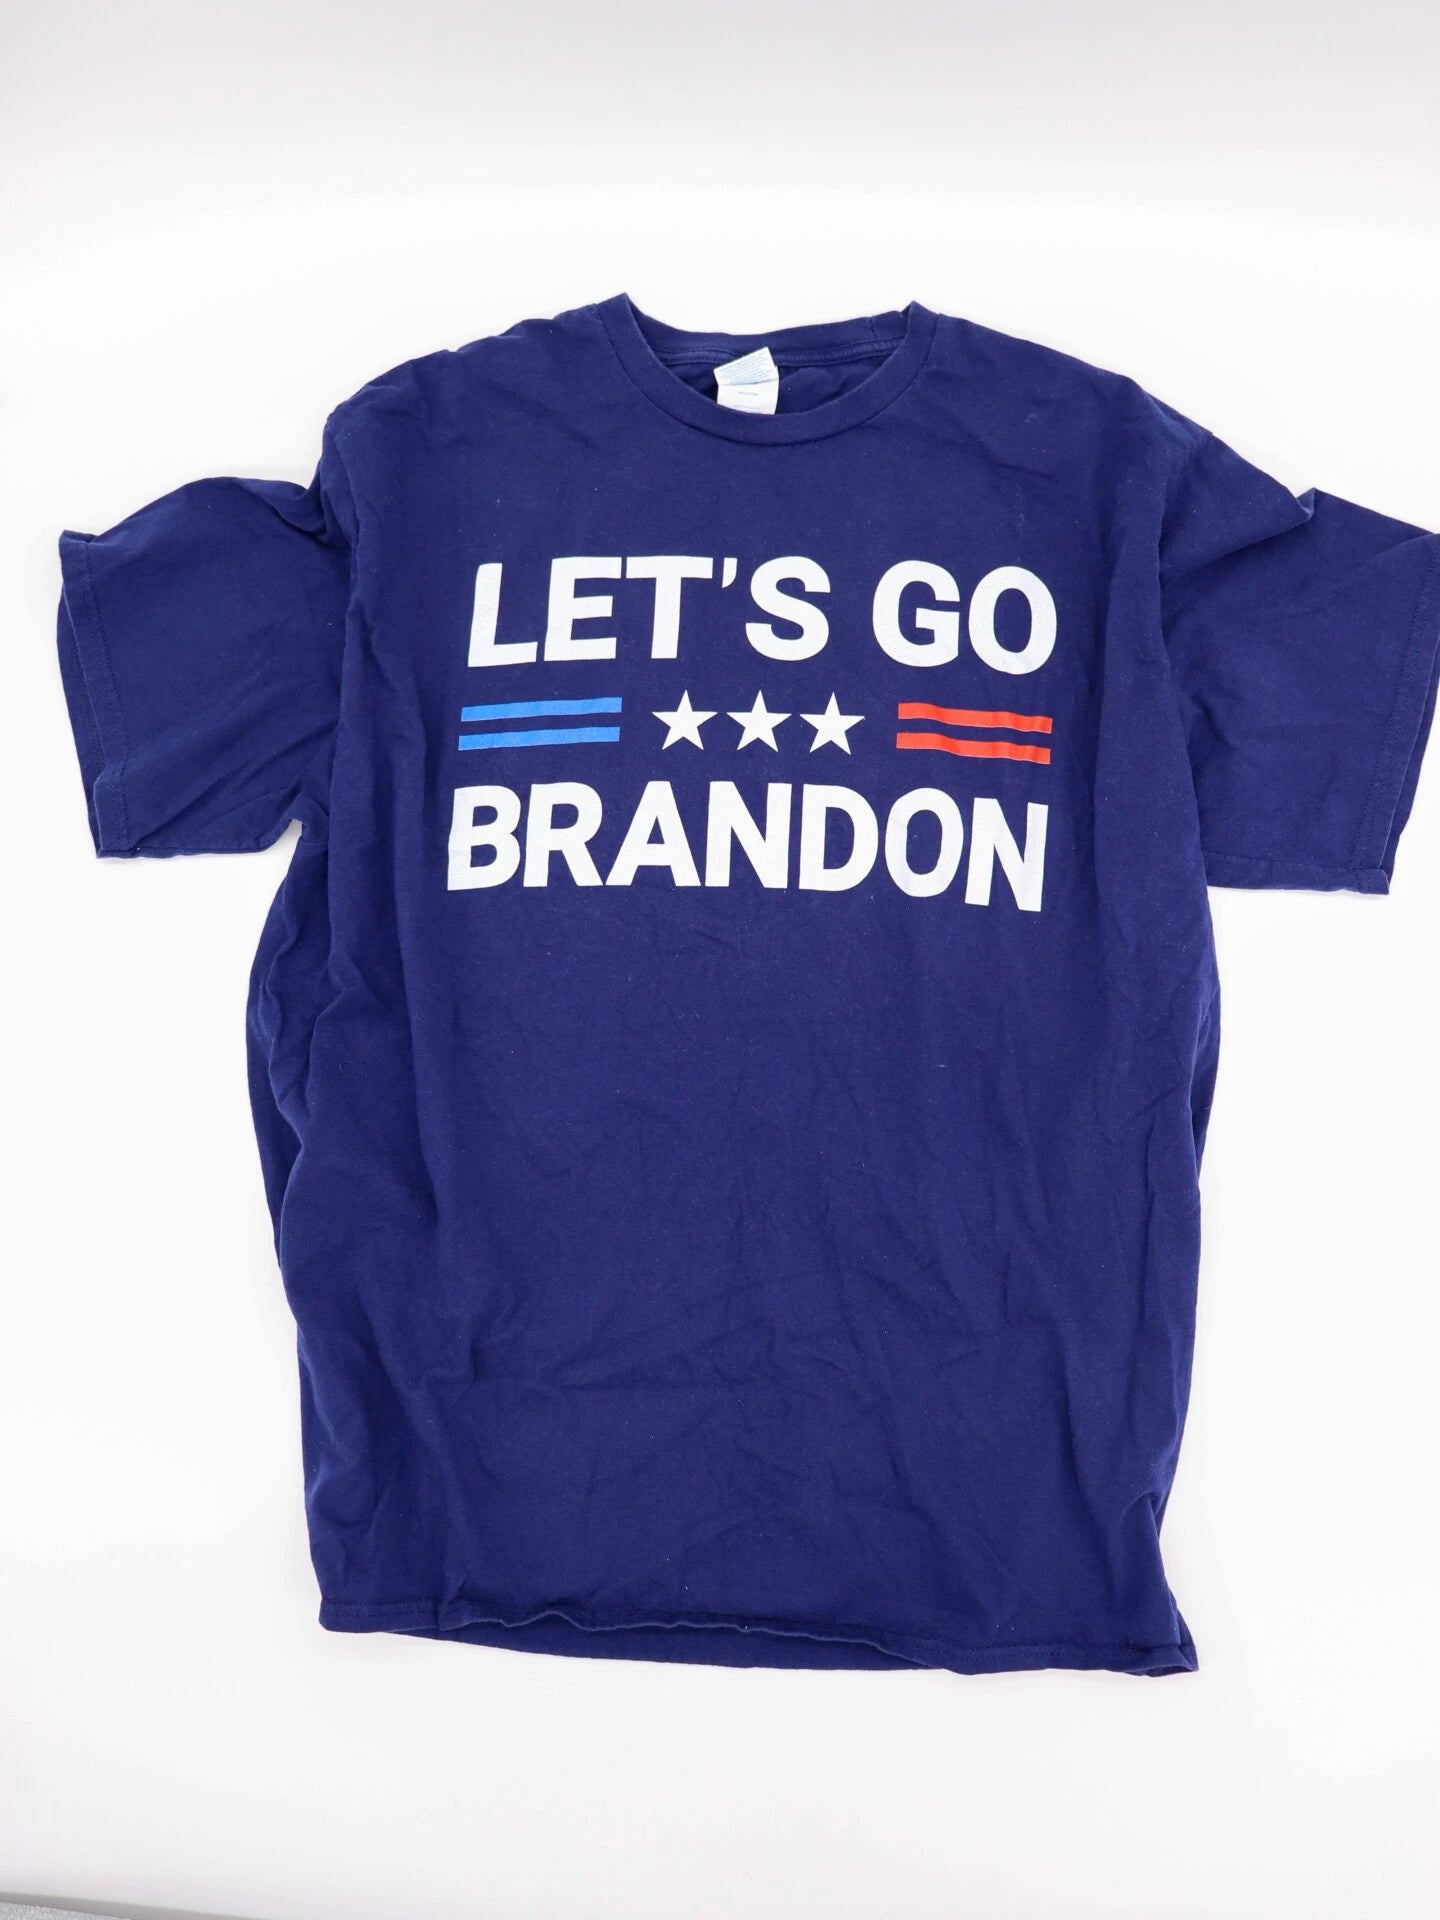 Let's Go Brandon” T-Shirt, Men's Size XXL, New – To Die For Collectibles